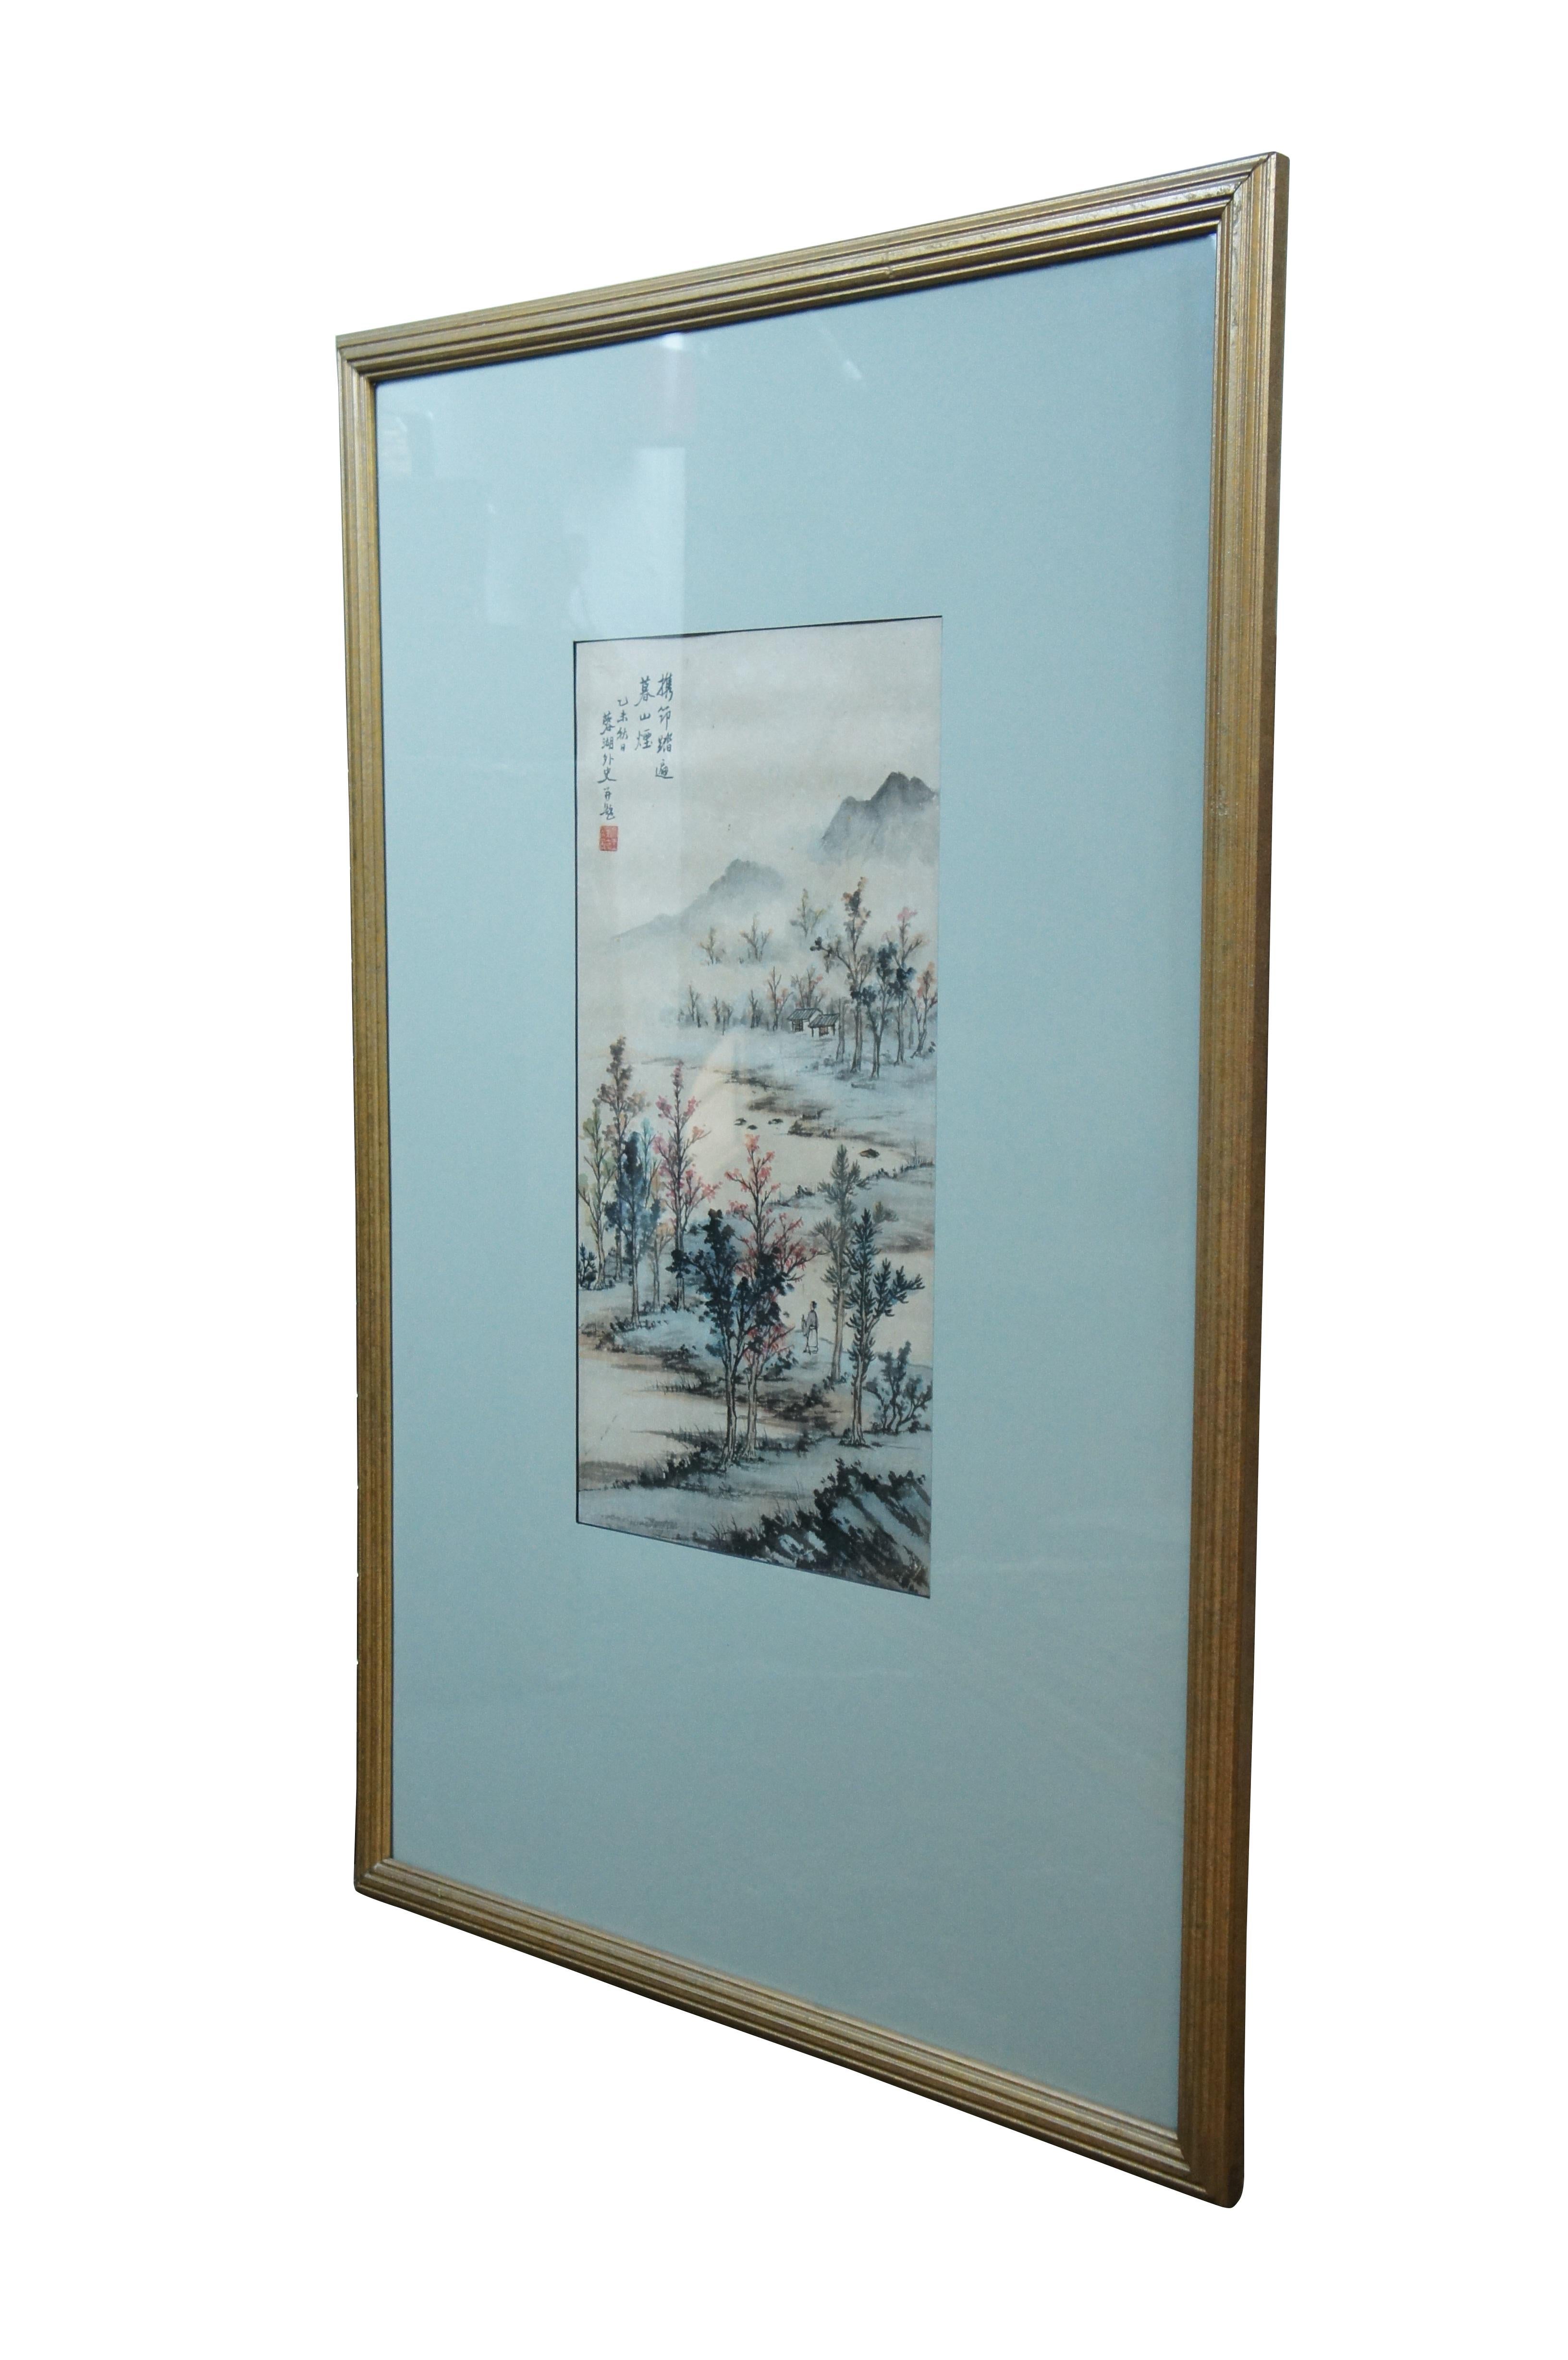 Antique Chinese landscape watercolor painting on paper showing a lone figure walking among the trees towards a small cottage on the misty mountains at dusk. Beveled giltwood frame; light blue mat.

Translation:
1 携節踏遍 Traveling all around during